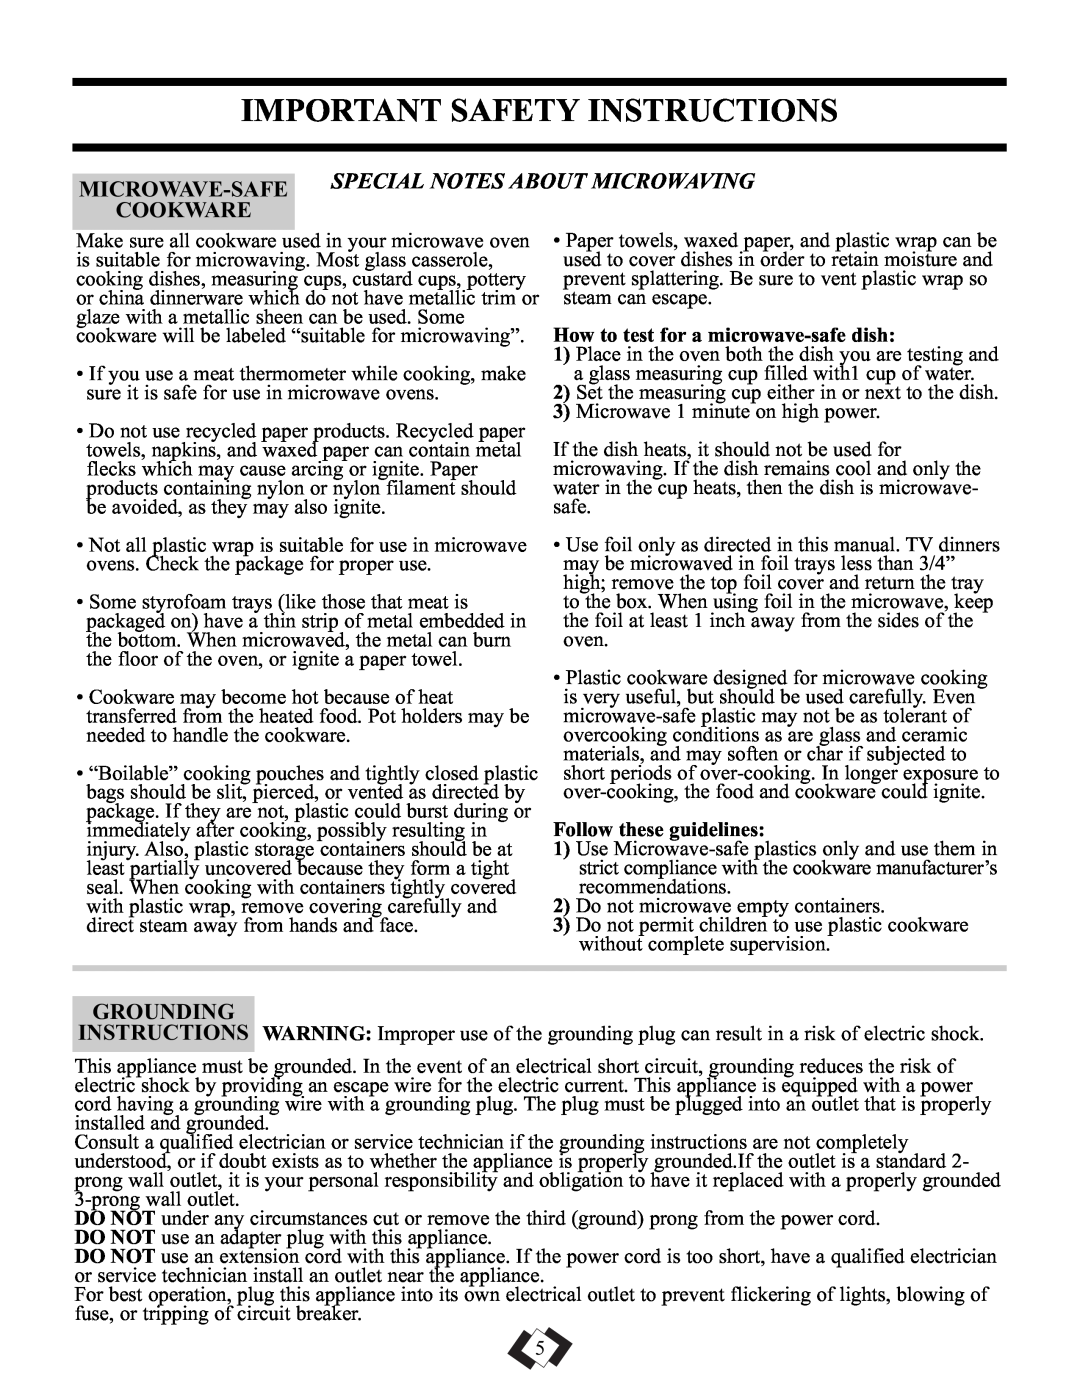 Danby DMW101KSSDD Important Safety Instructions, Microwave-Safe Special Notes About Microwaving Cookware, Grounding 